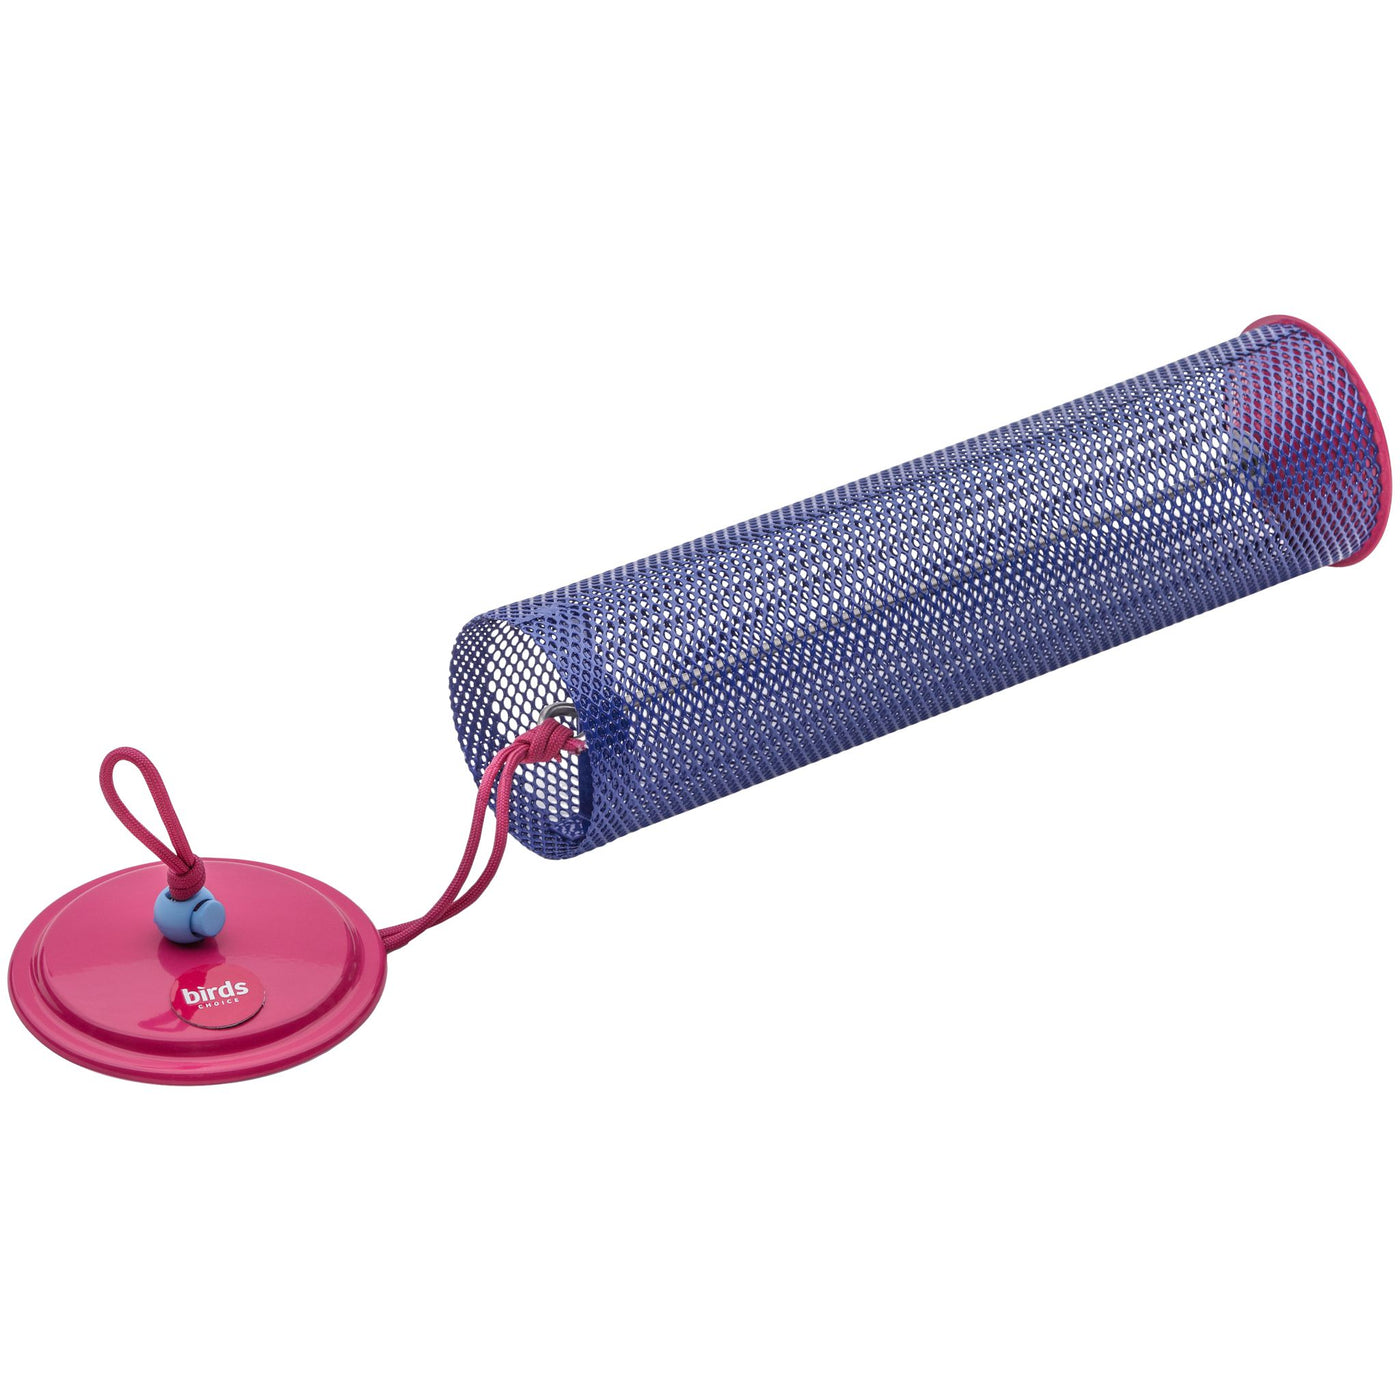 Magnet Mesh Tube Feeder Color Pop Collection for Finches in Blue and Fuchsia - Birds Choice